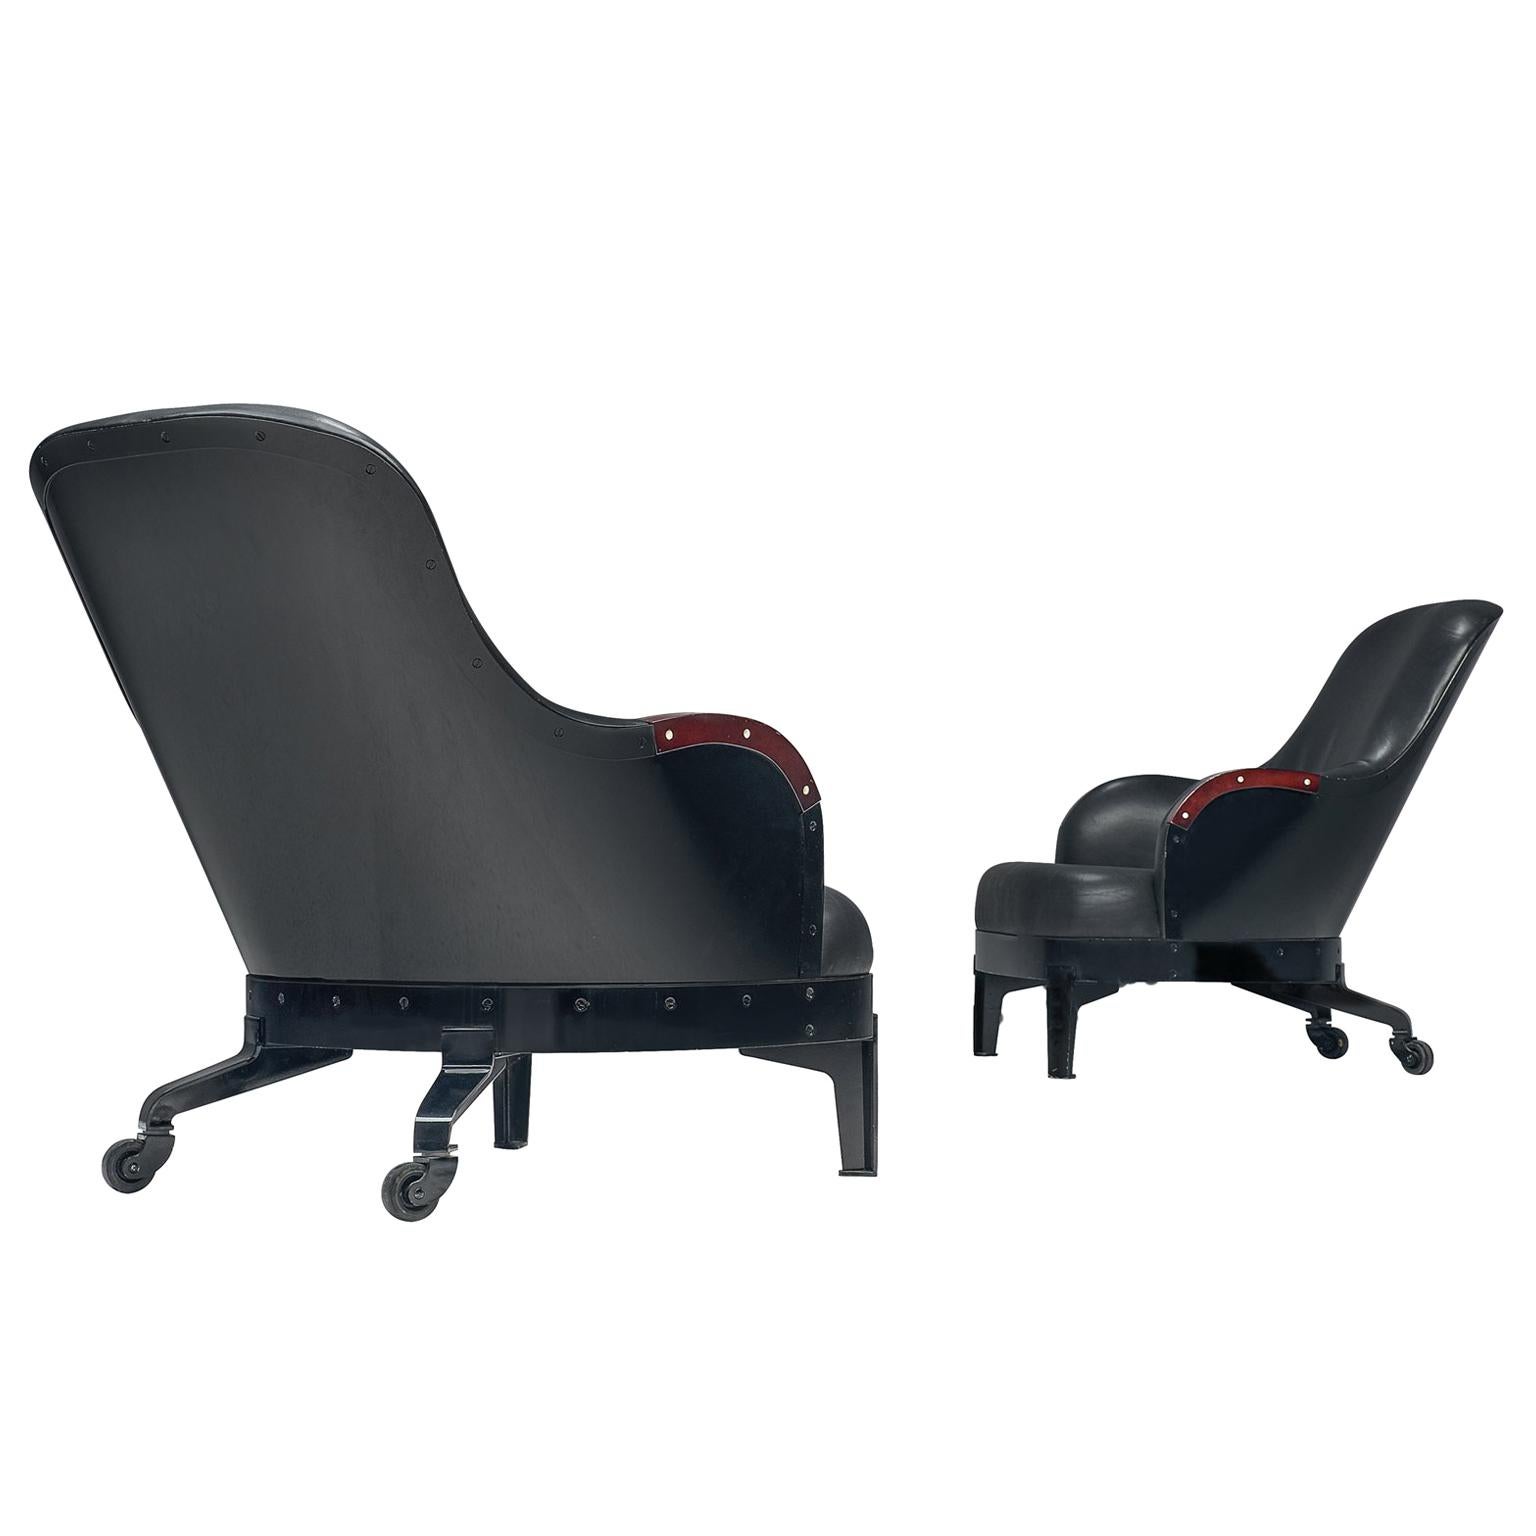 Mats Theselius for Källerno the Ritz Lounge Chairs 39/90 and 90/90